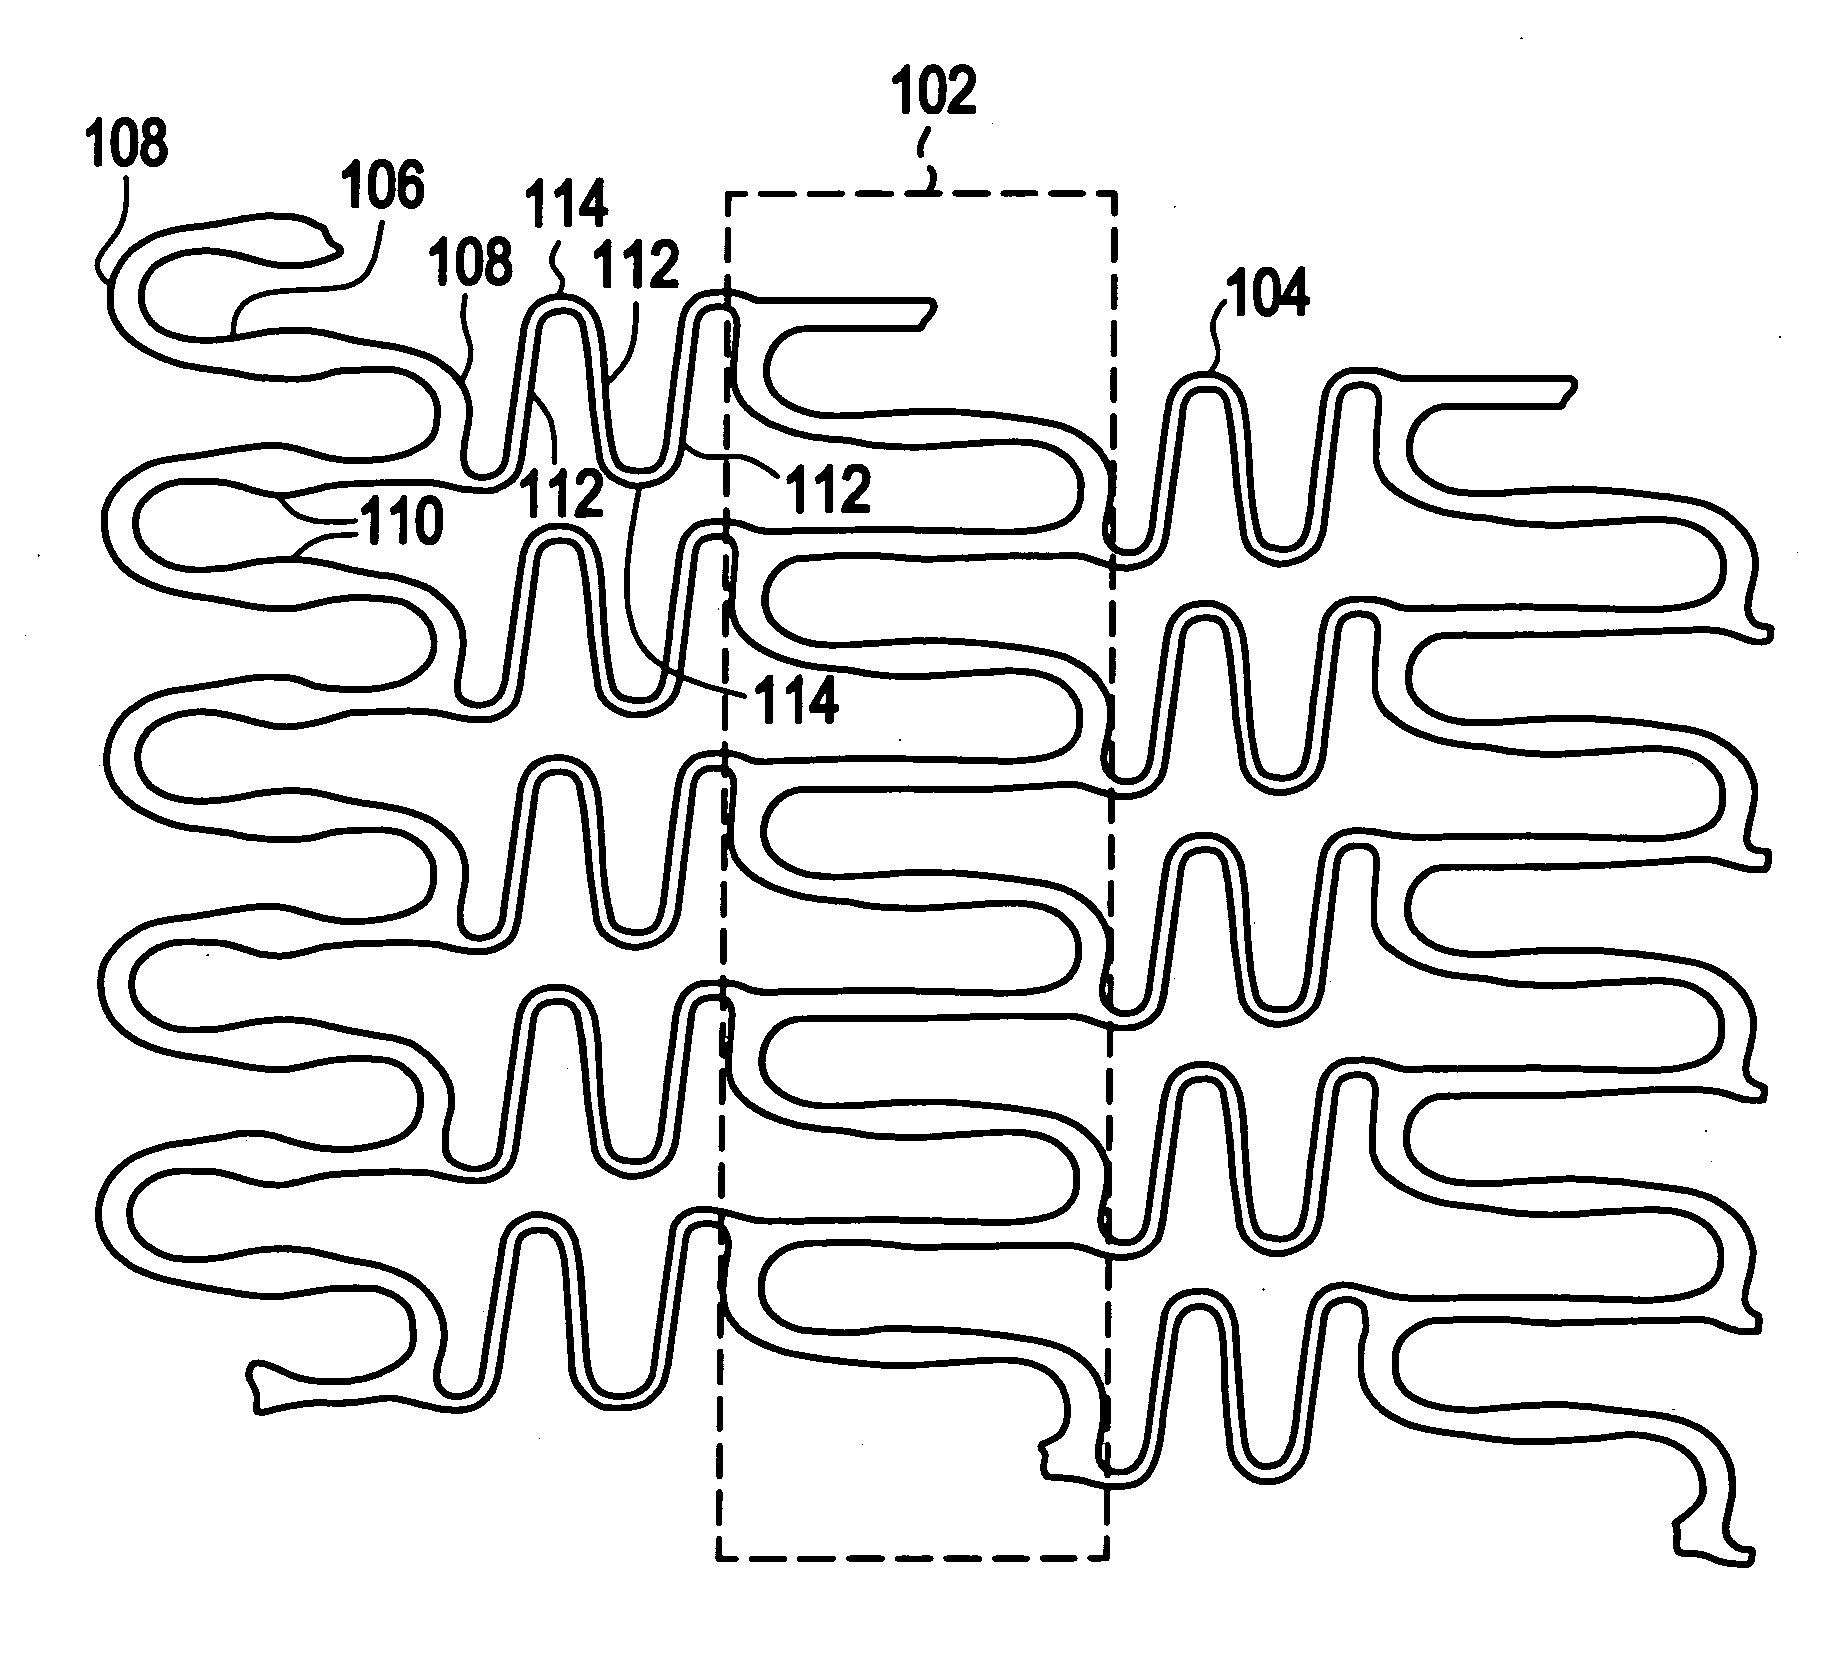 Polymeric stent having modified molecular structures in the flexible connectors and the radial arcs of the hoops